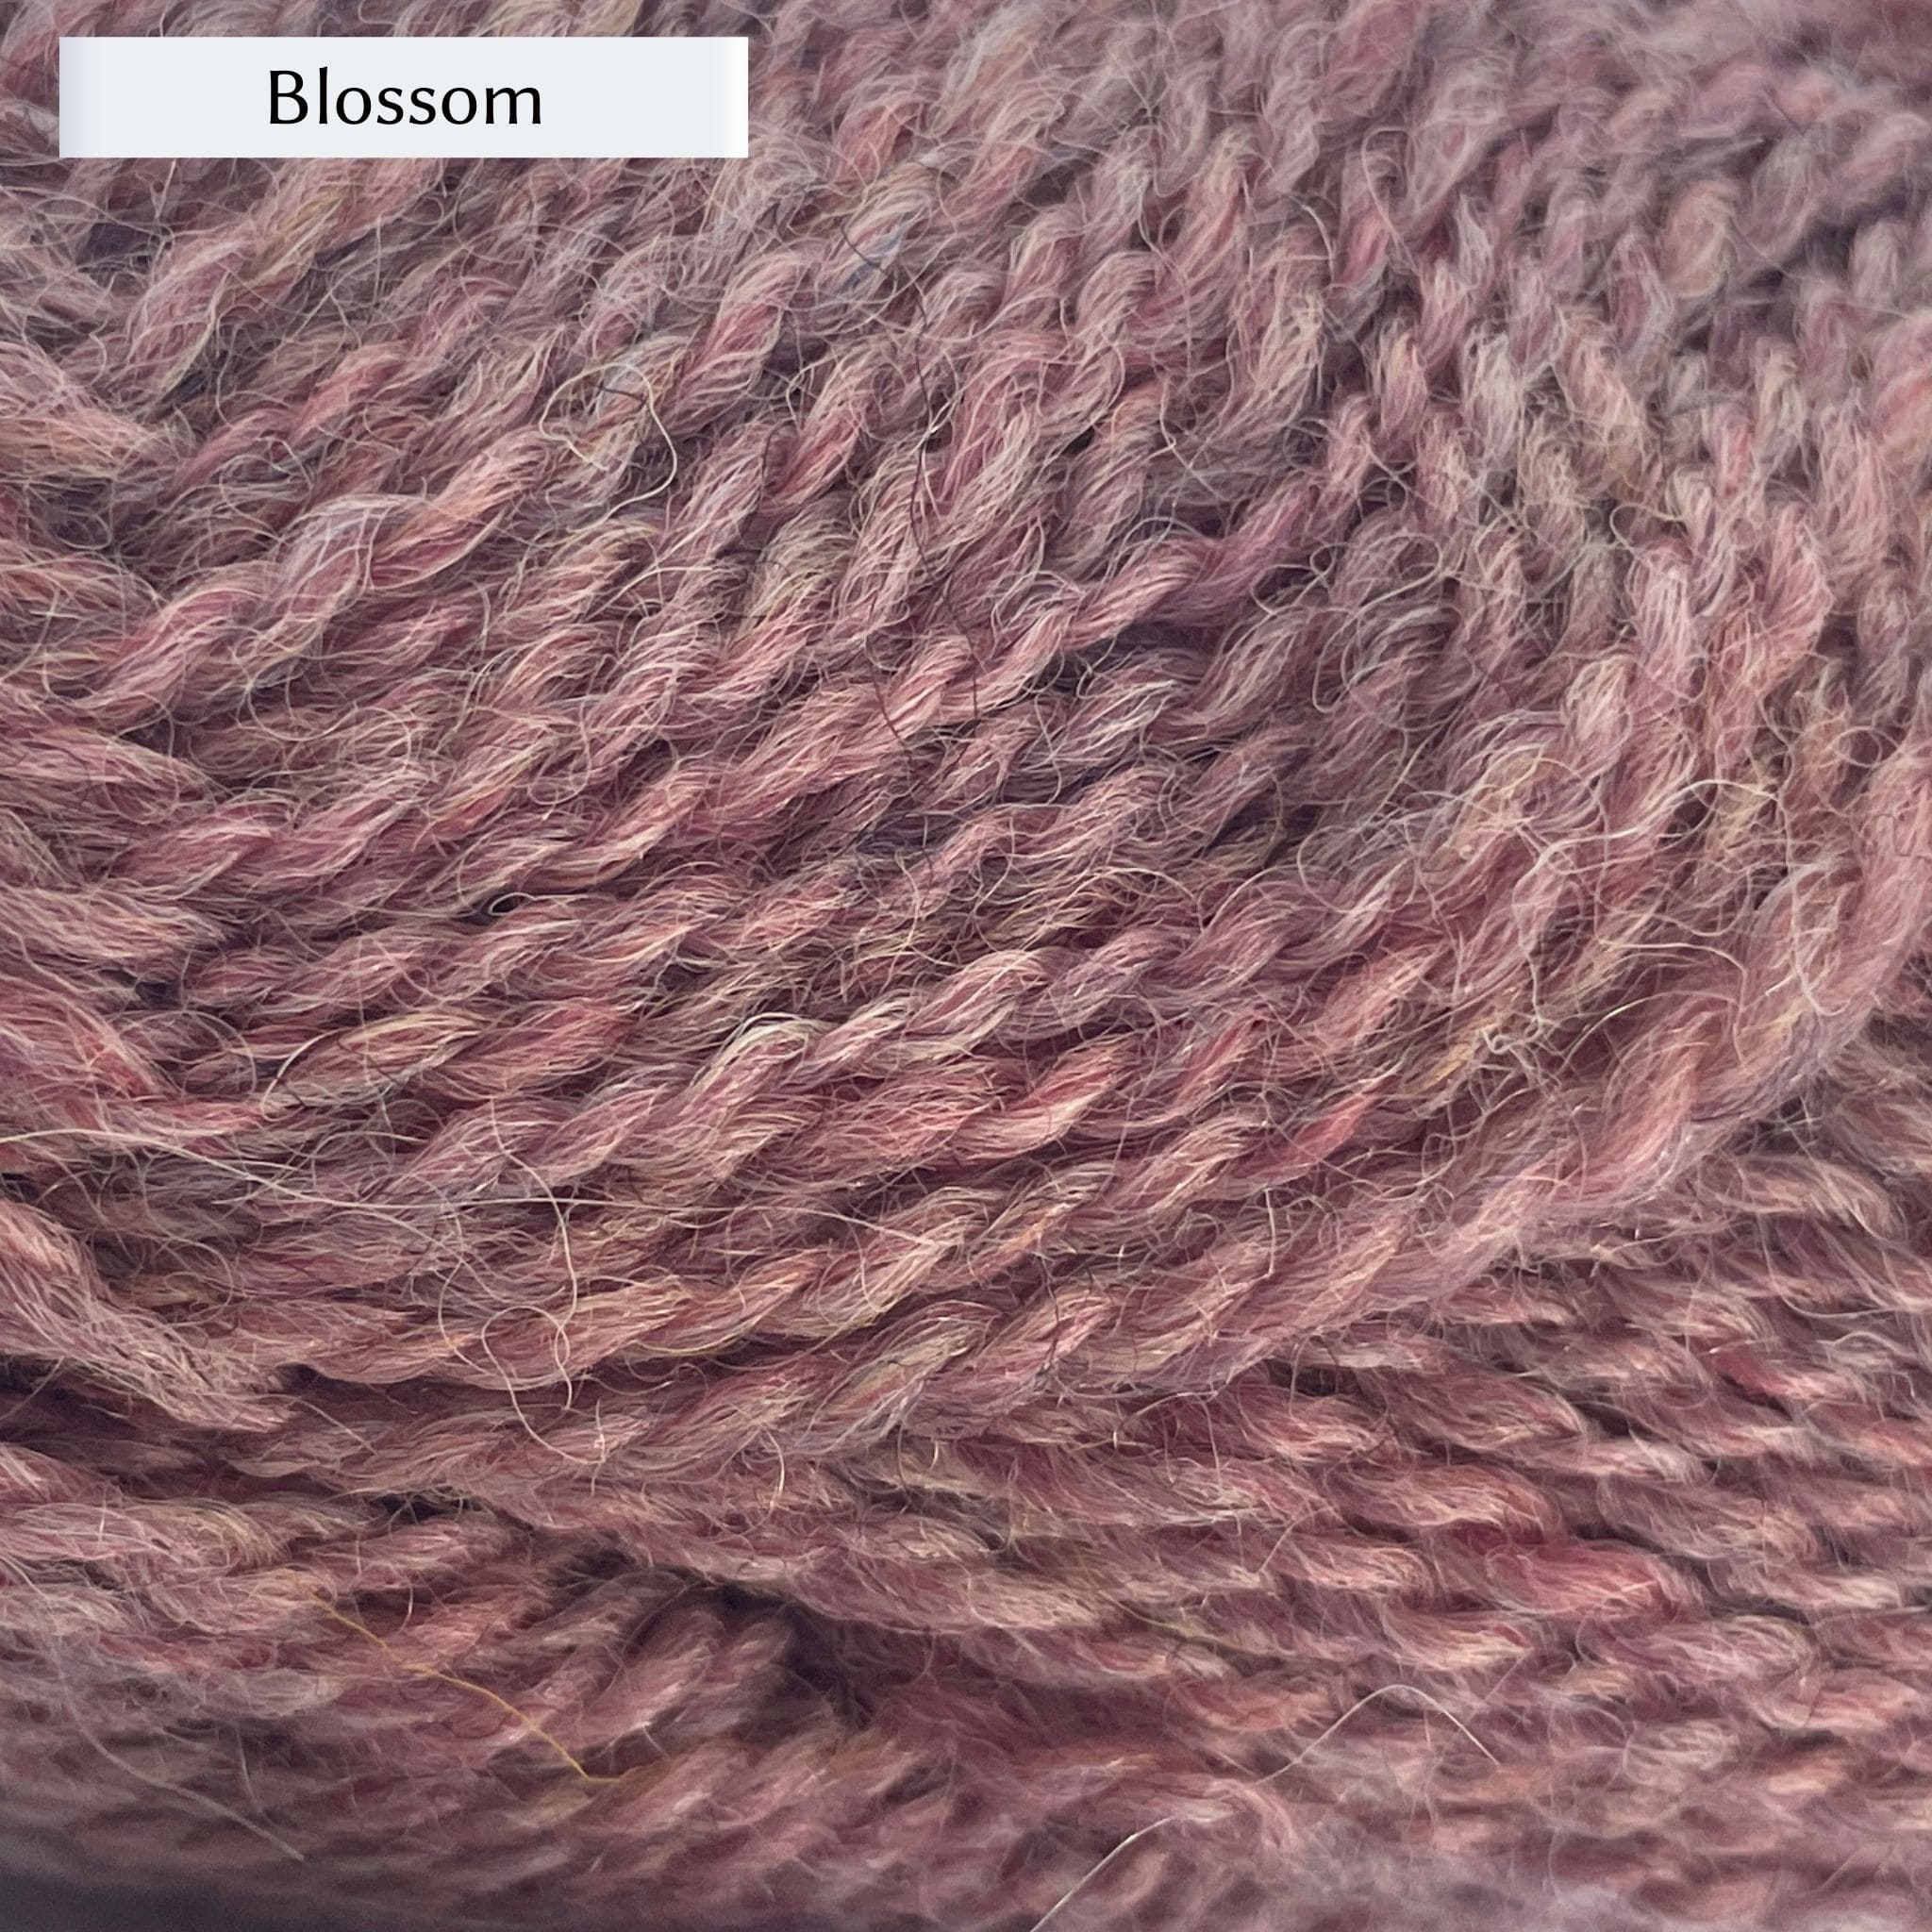 Marie Wallin's British Breeds yarn, a fingering weight, in color Blossom, a ballet pink